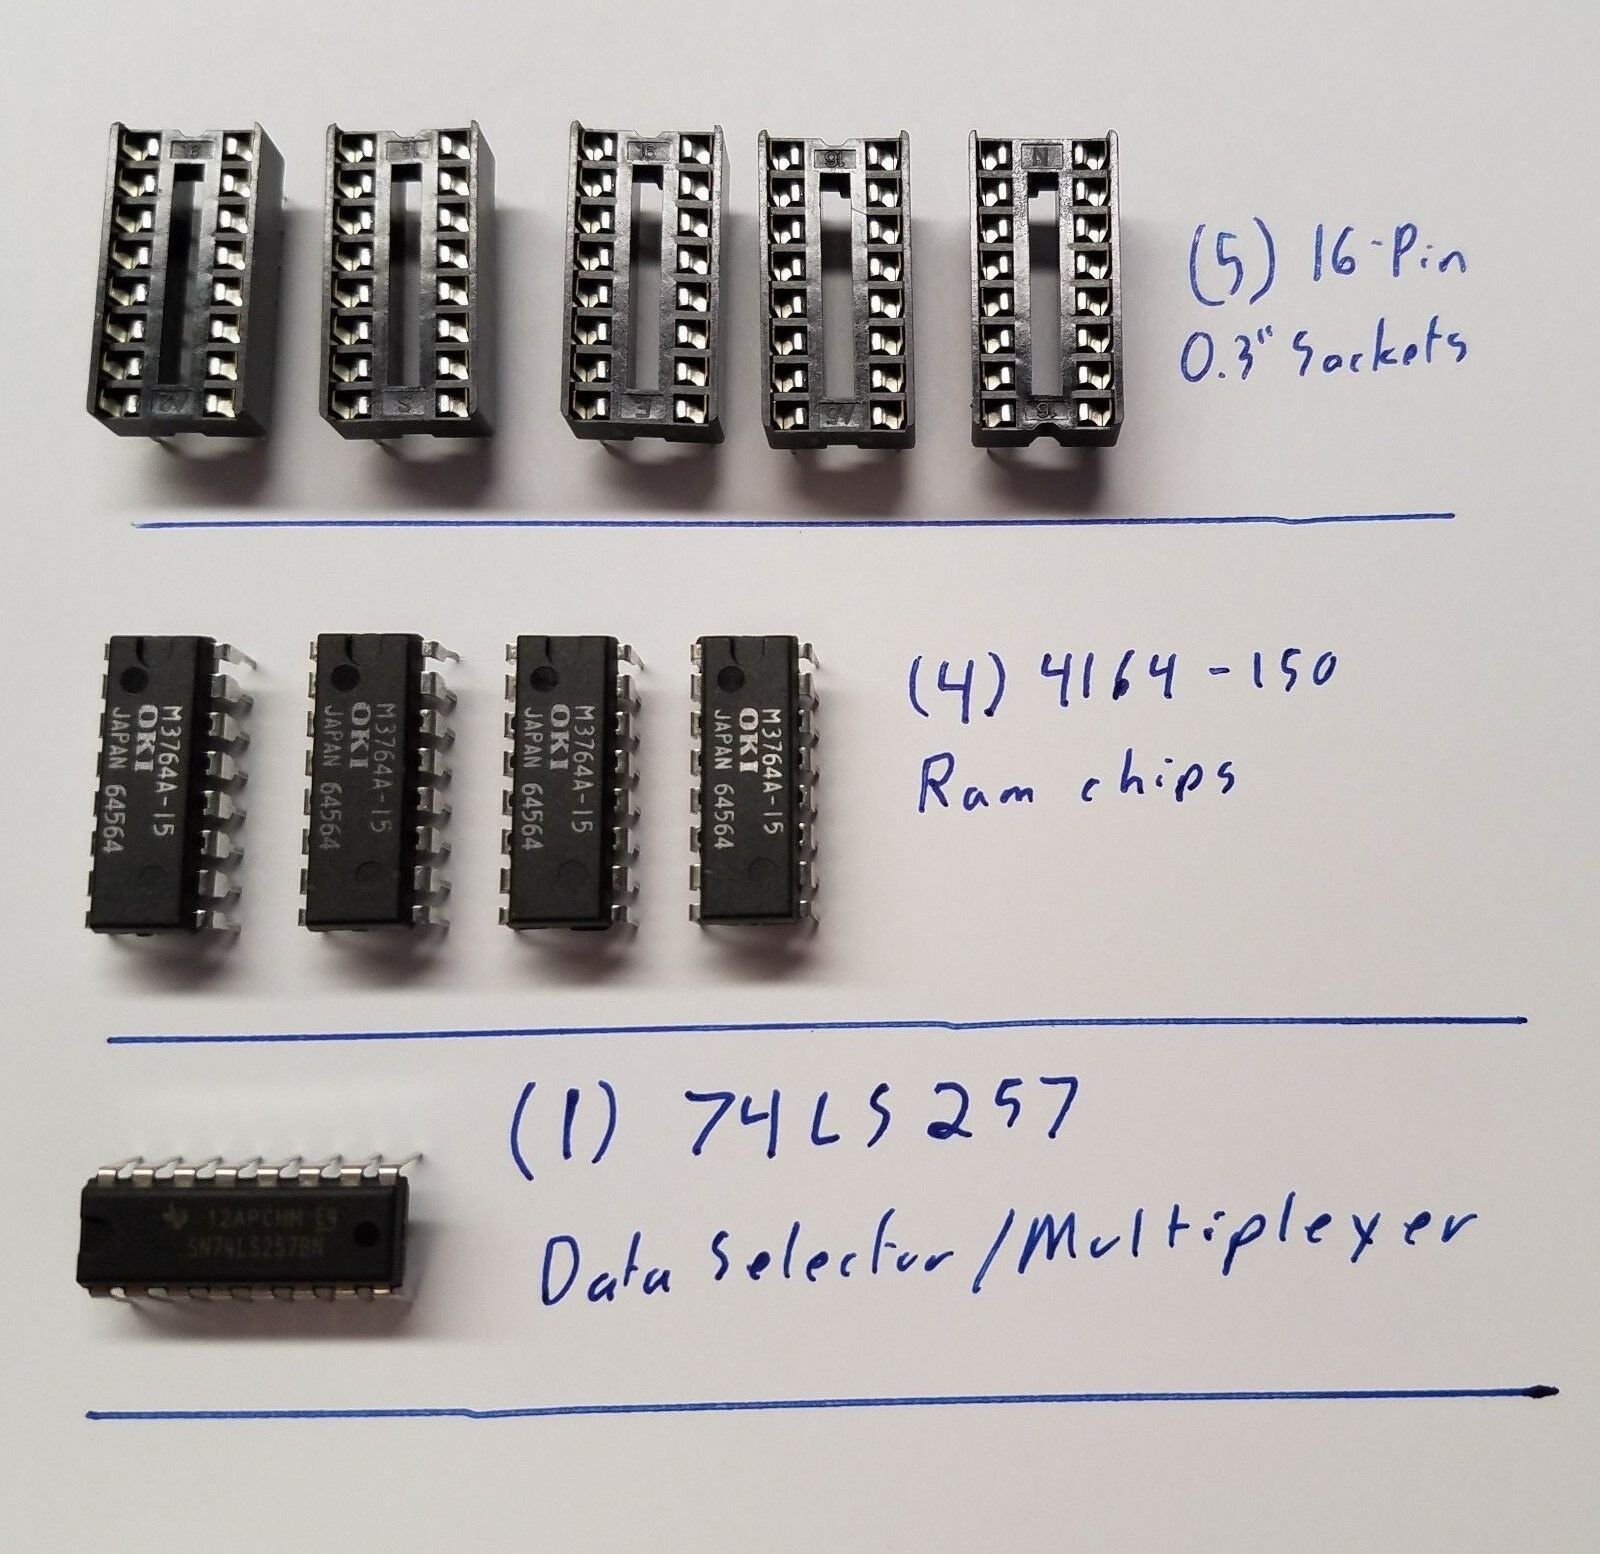 Replacement 4164 Ram Kit For Commodore 64 (includes 4 Ram Ics)